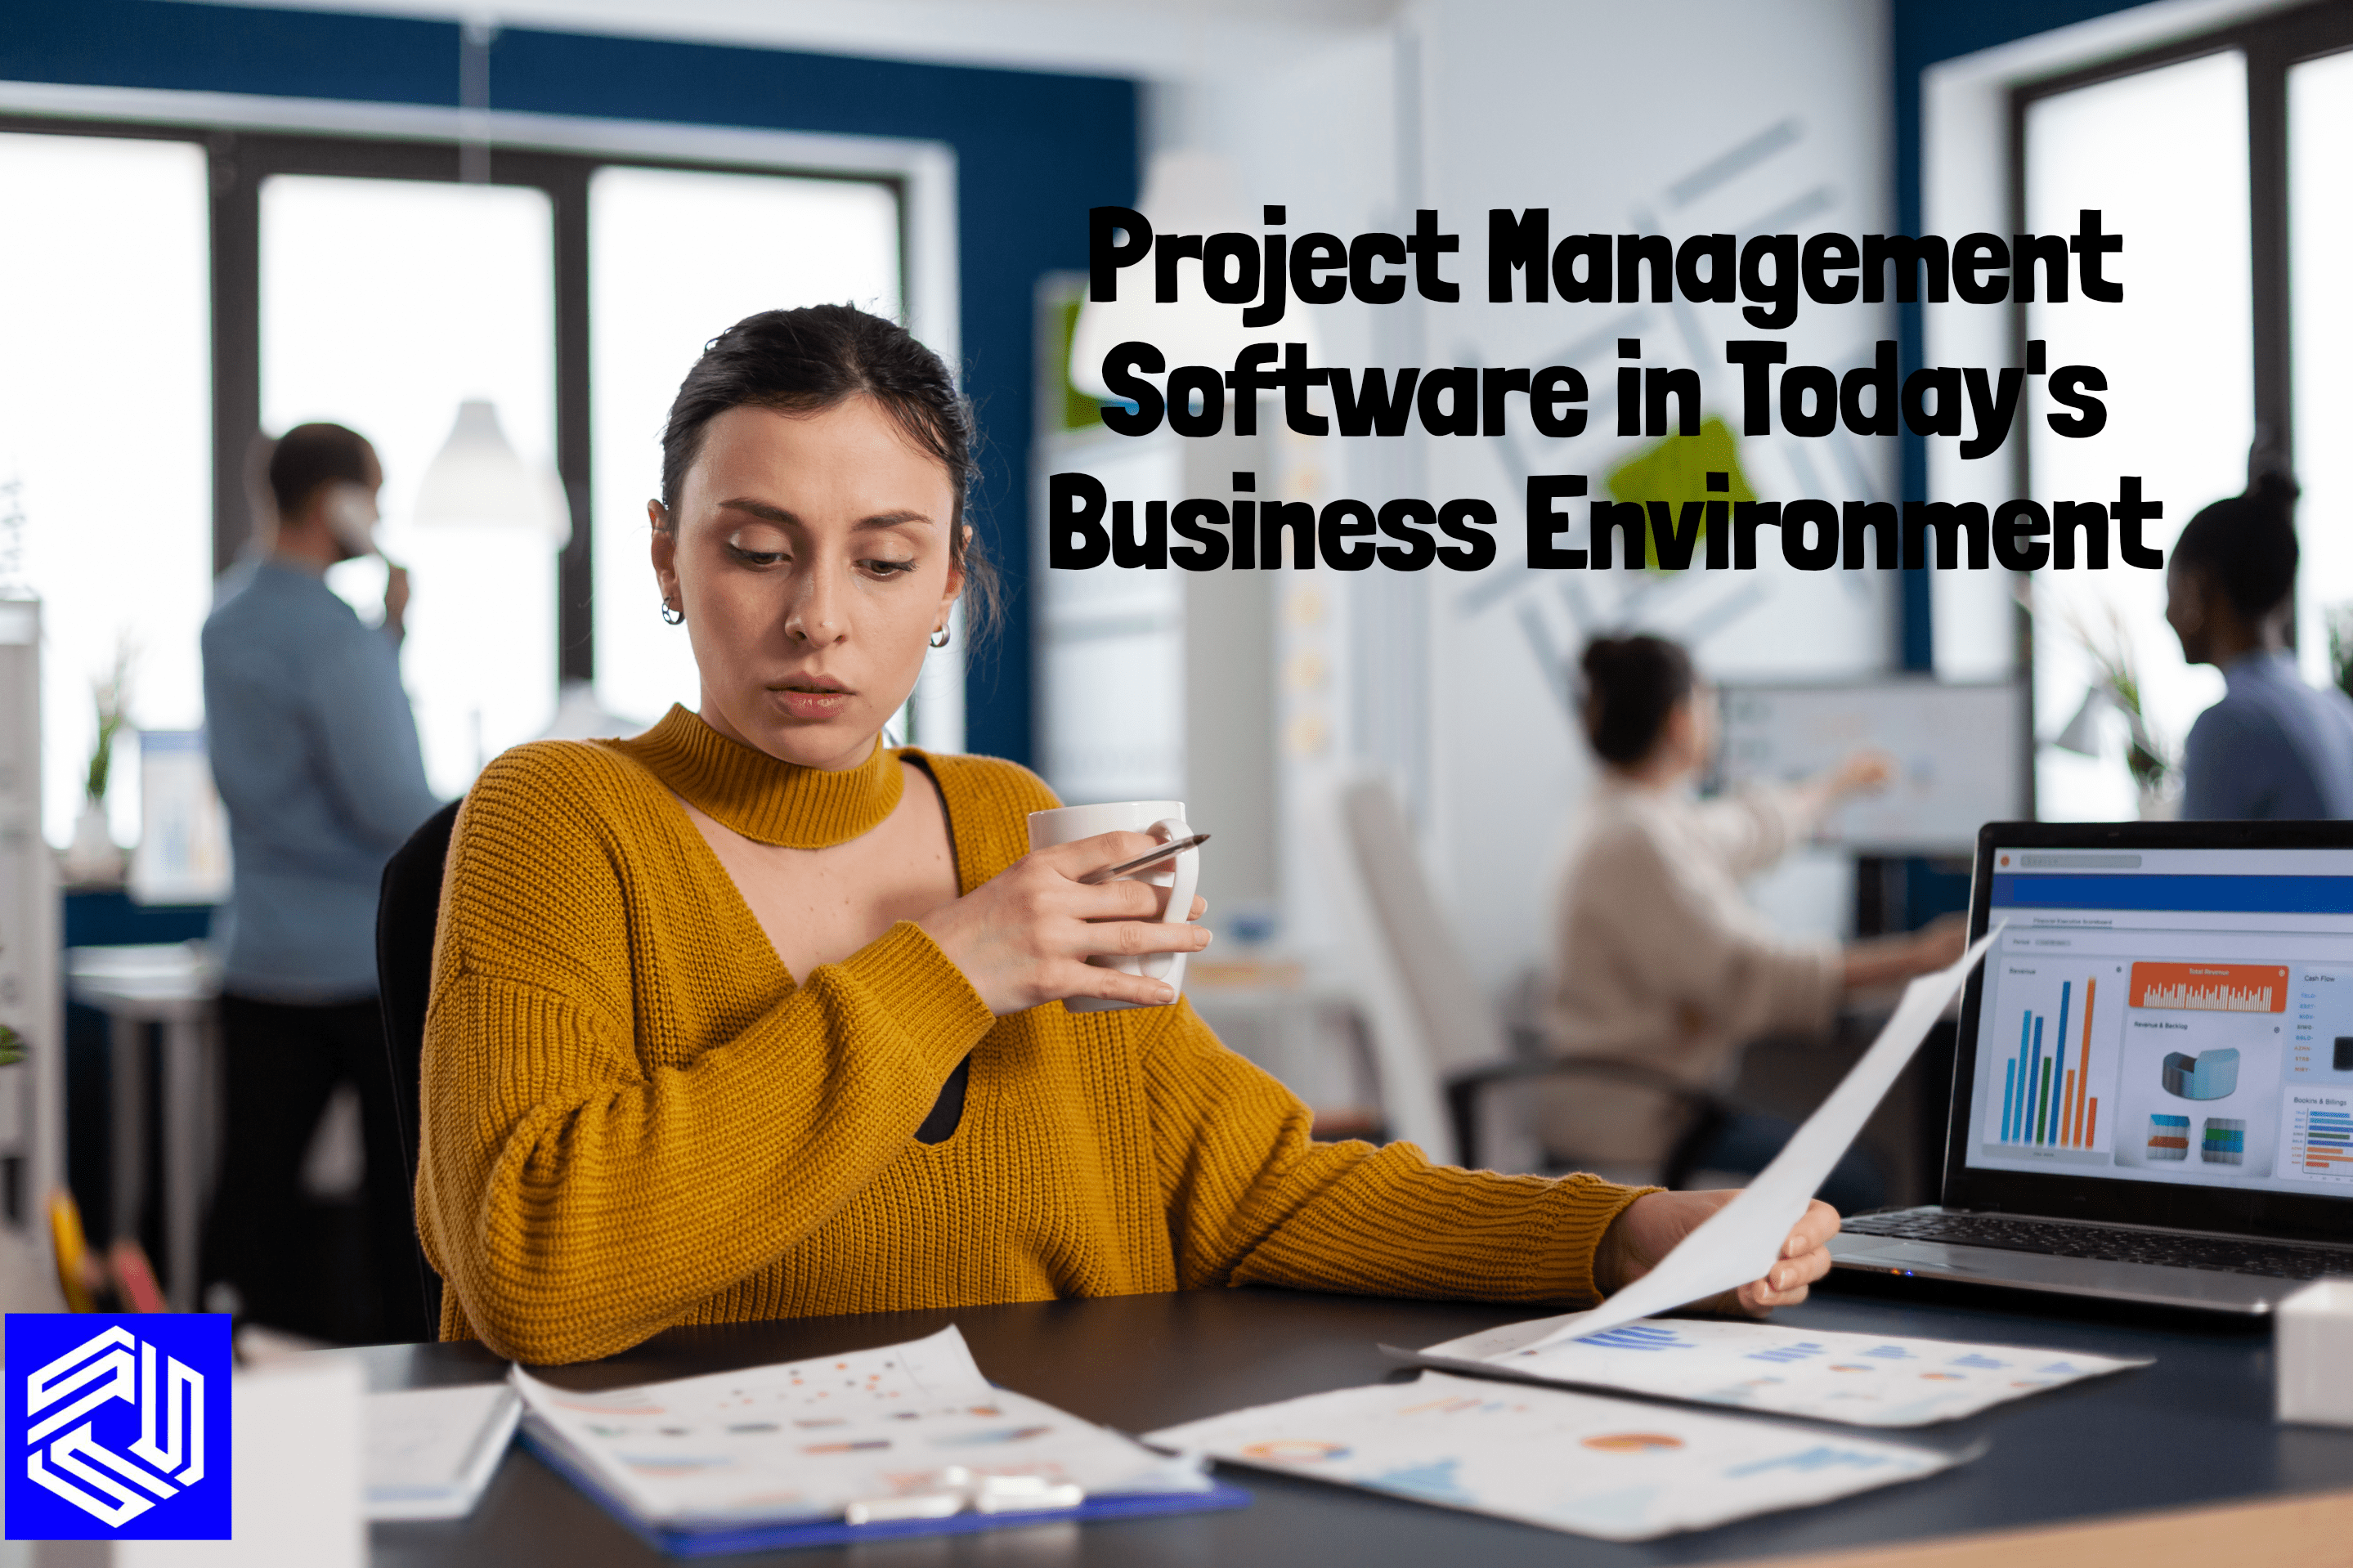 project management software in today's business environment